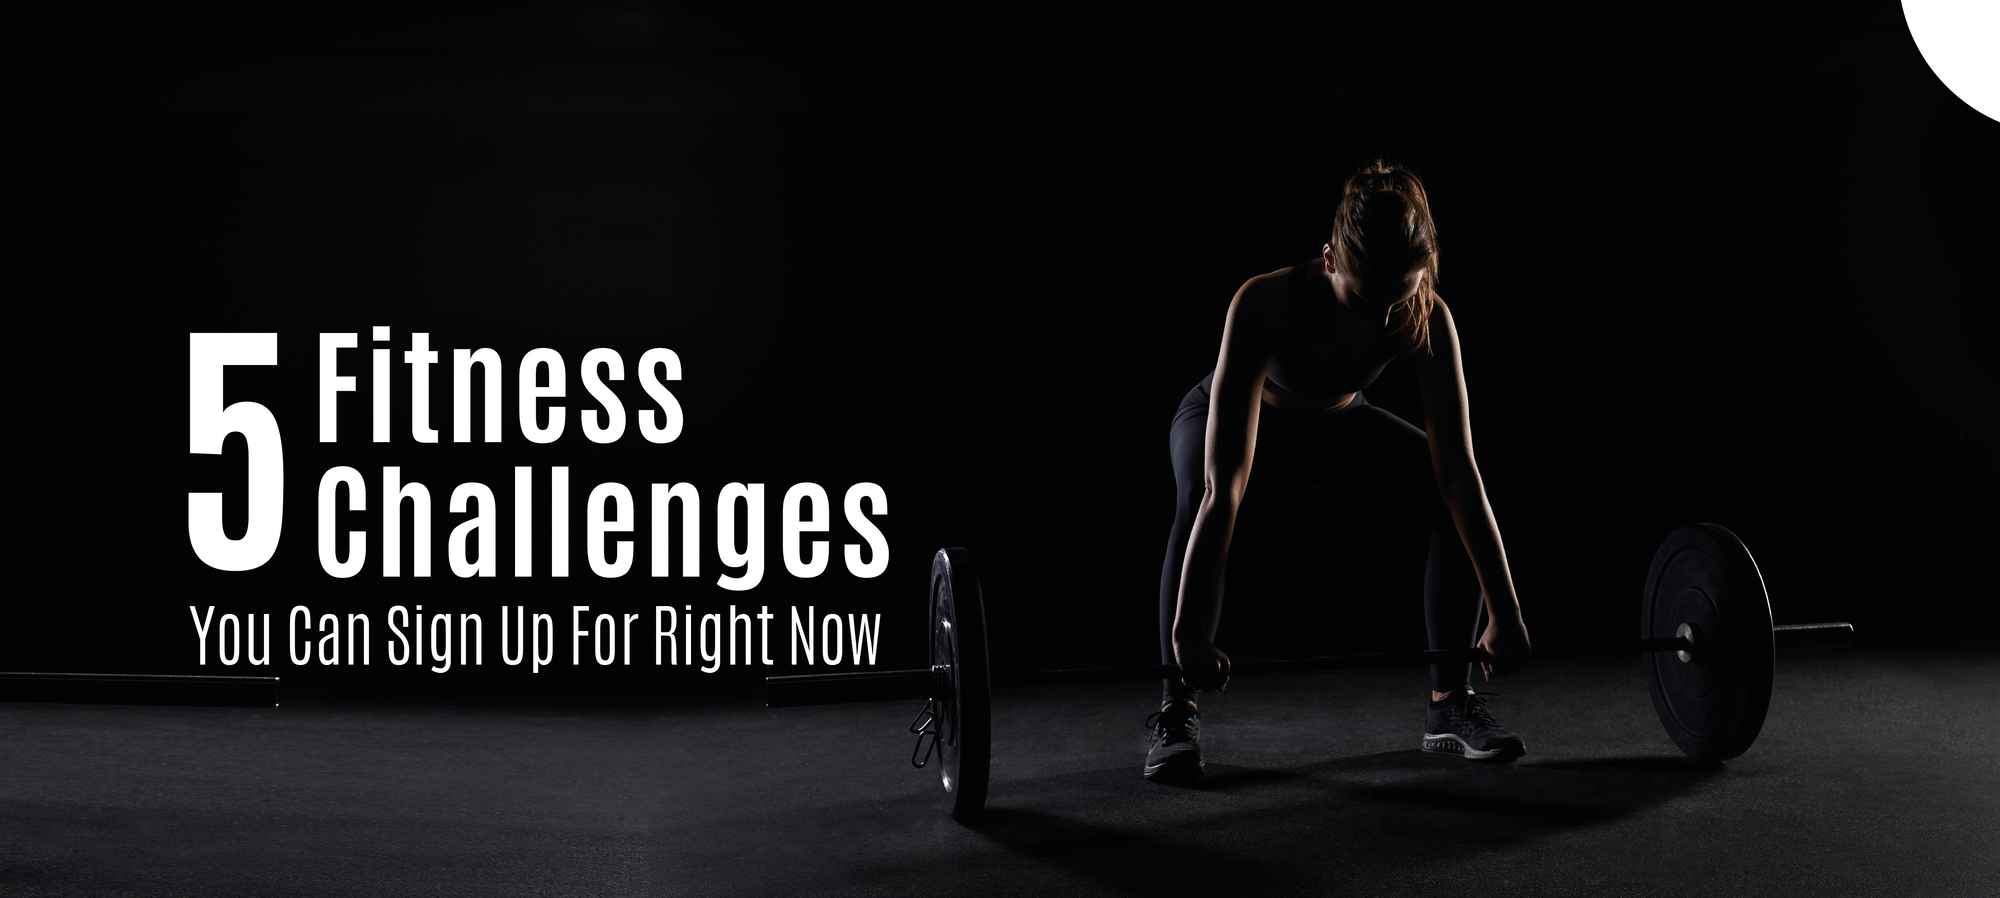 Start your fitness new-year resolution early! 